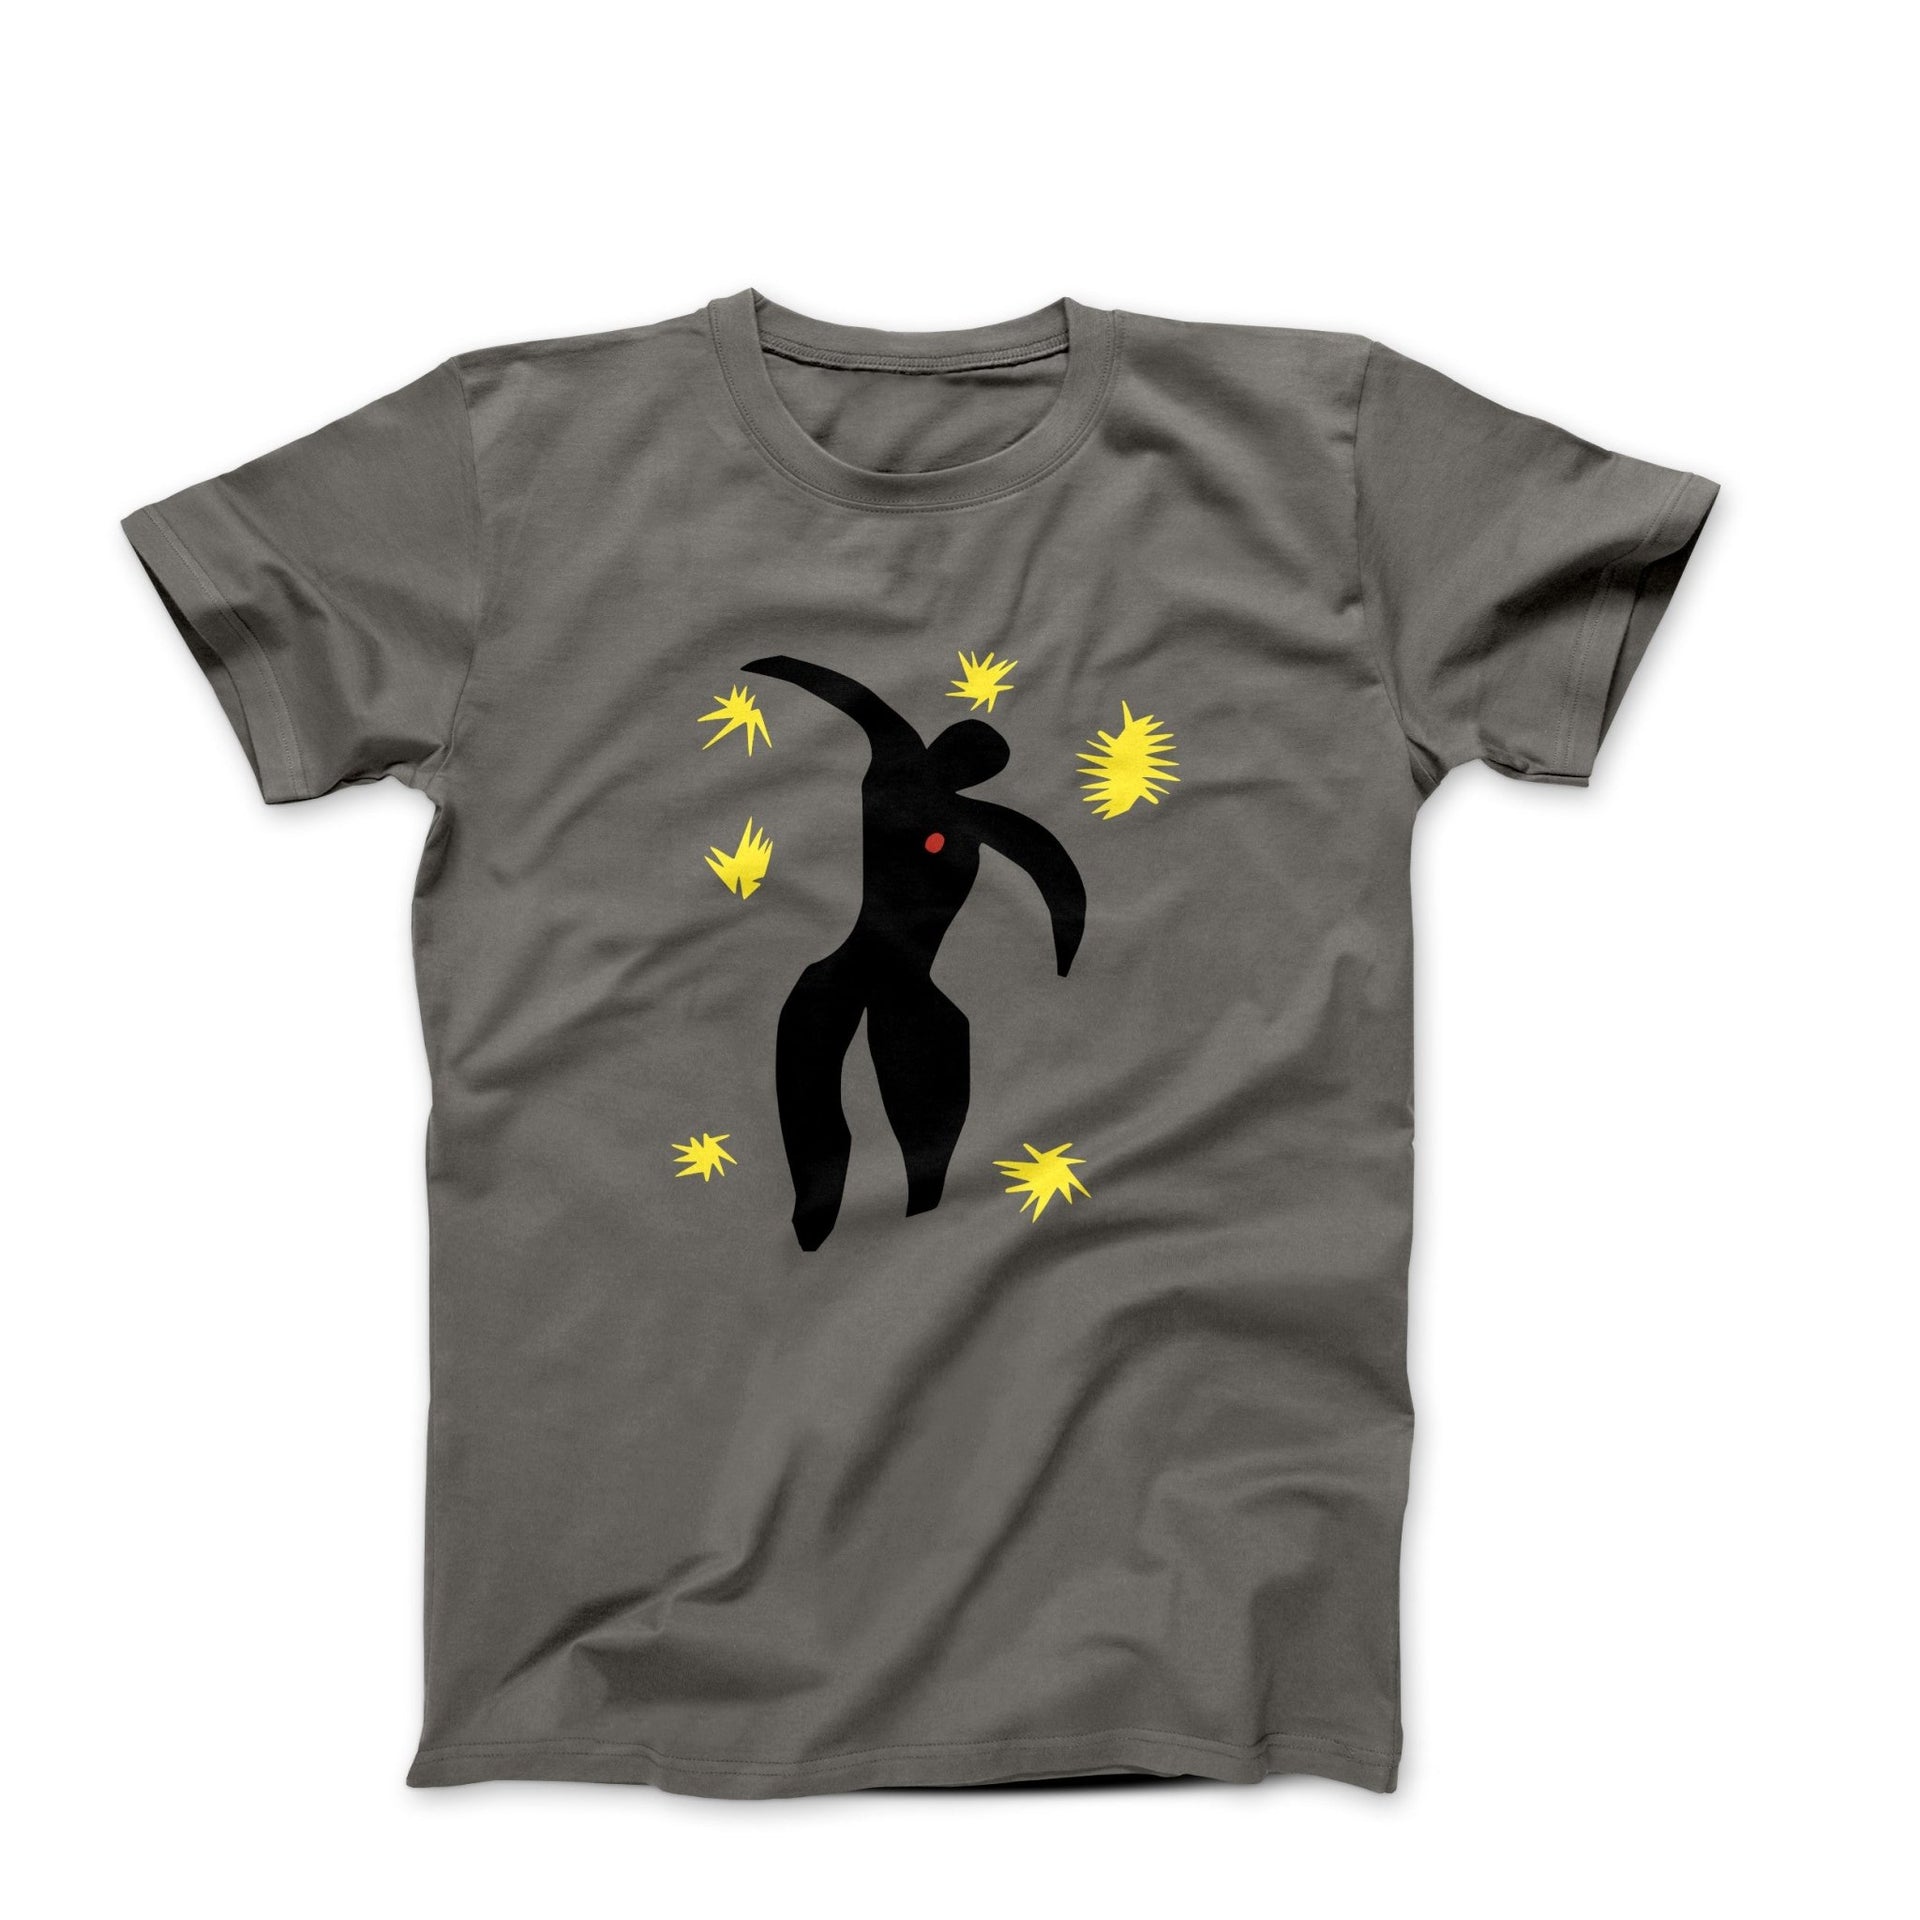 Henri Matisse Icarus Plate VIII from the Book "Jazz" (1947) T-Shirt - Clothing - Harvey Ltd